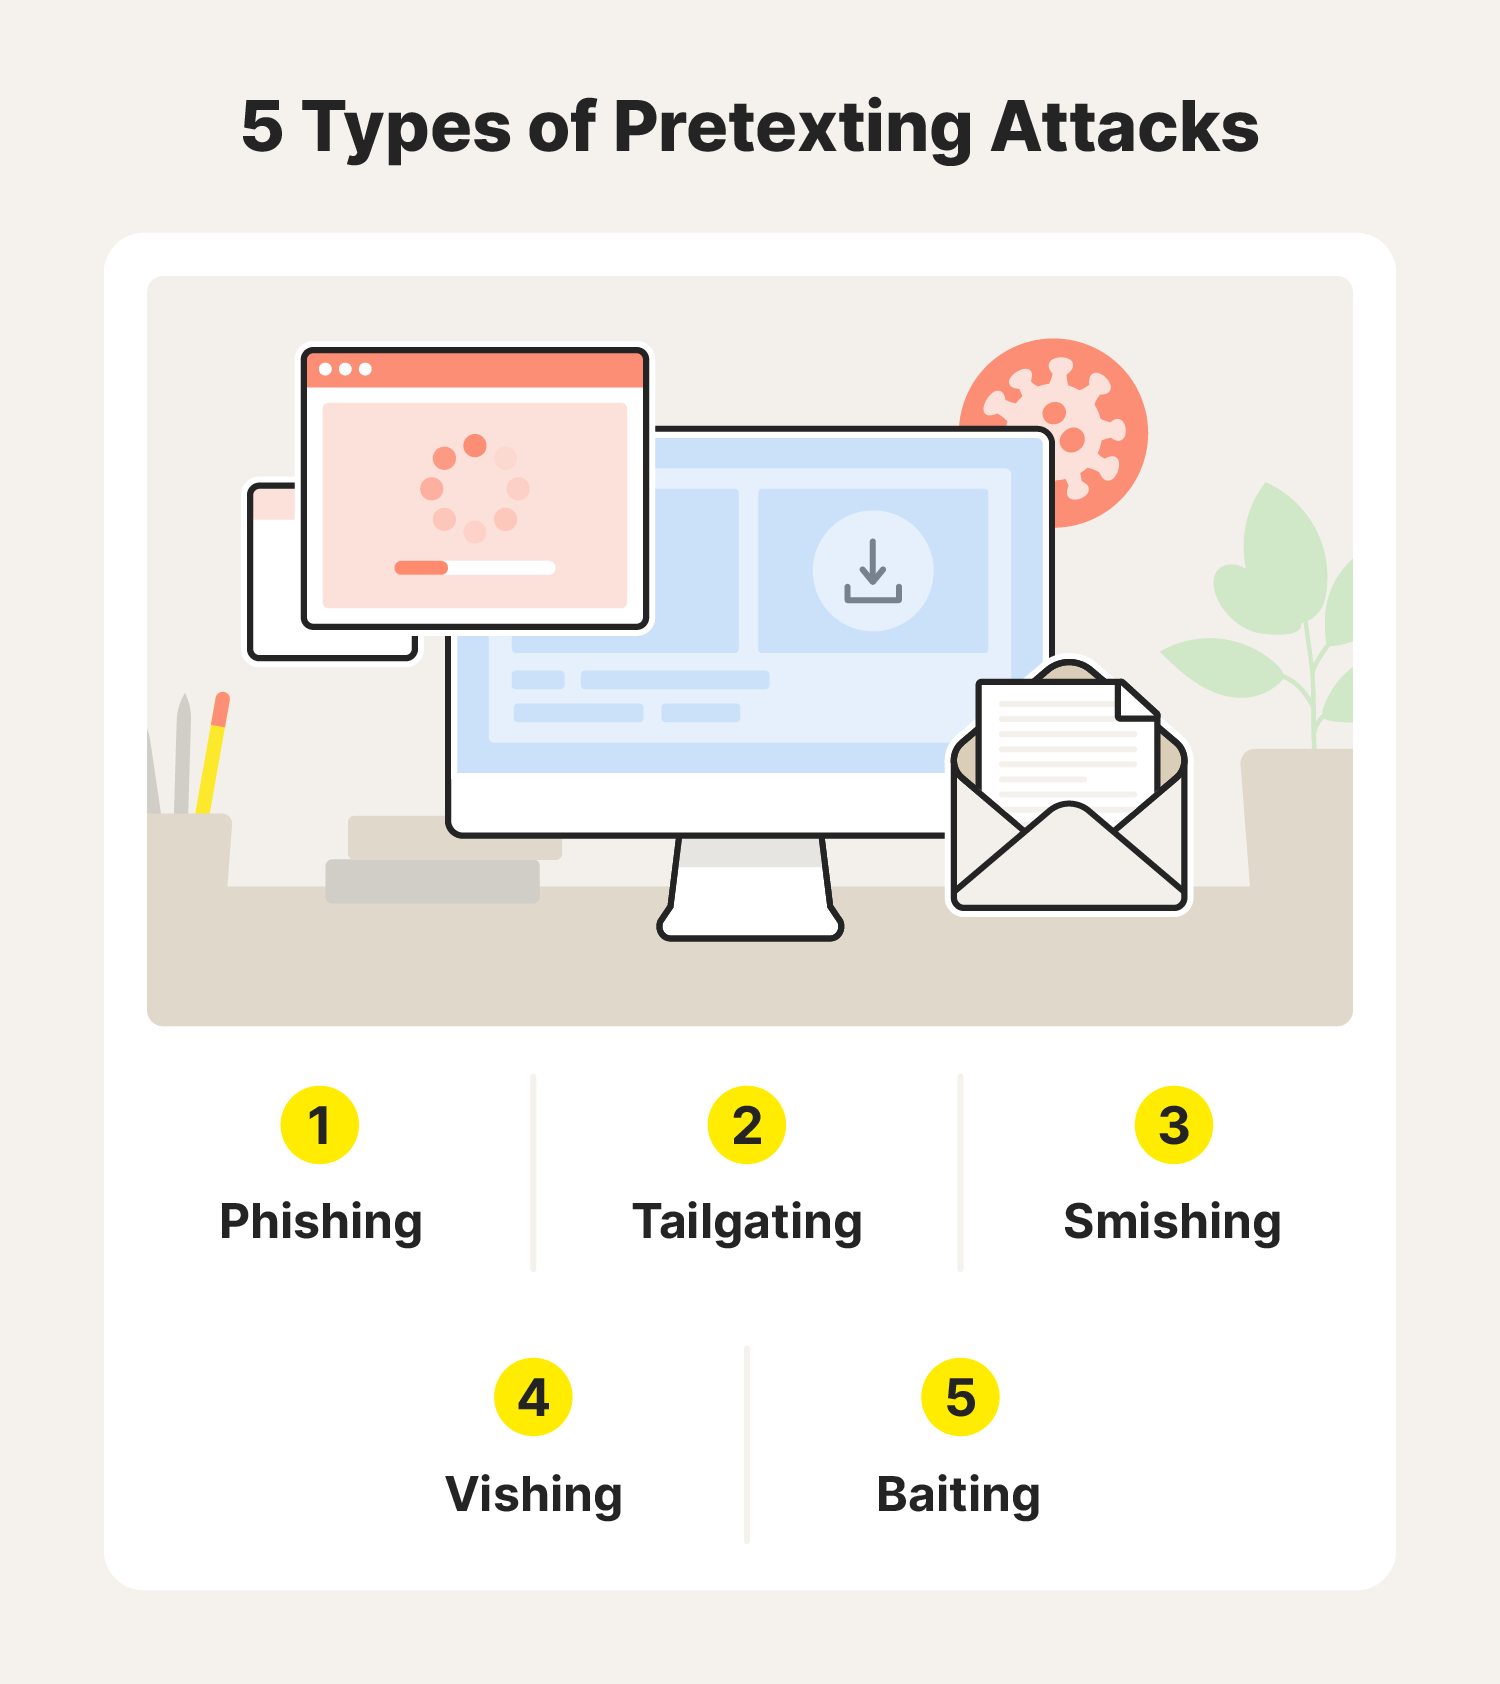 The image shows a computer and lists five types of pretexting attacks: phishing, tailgating, smishing, vishing, and baiting.